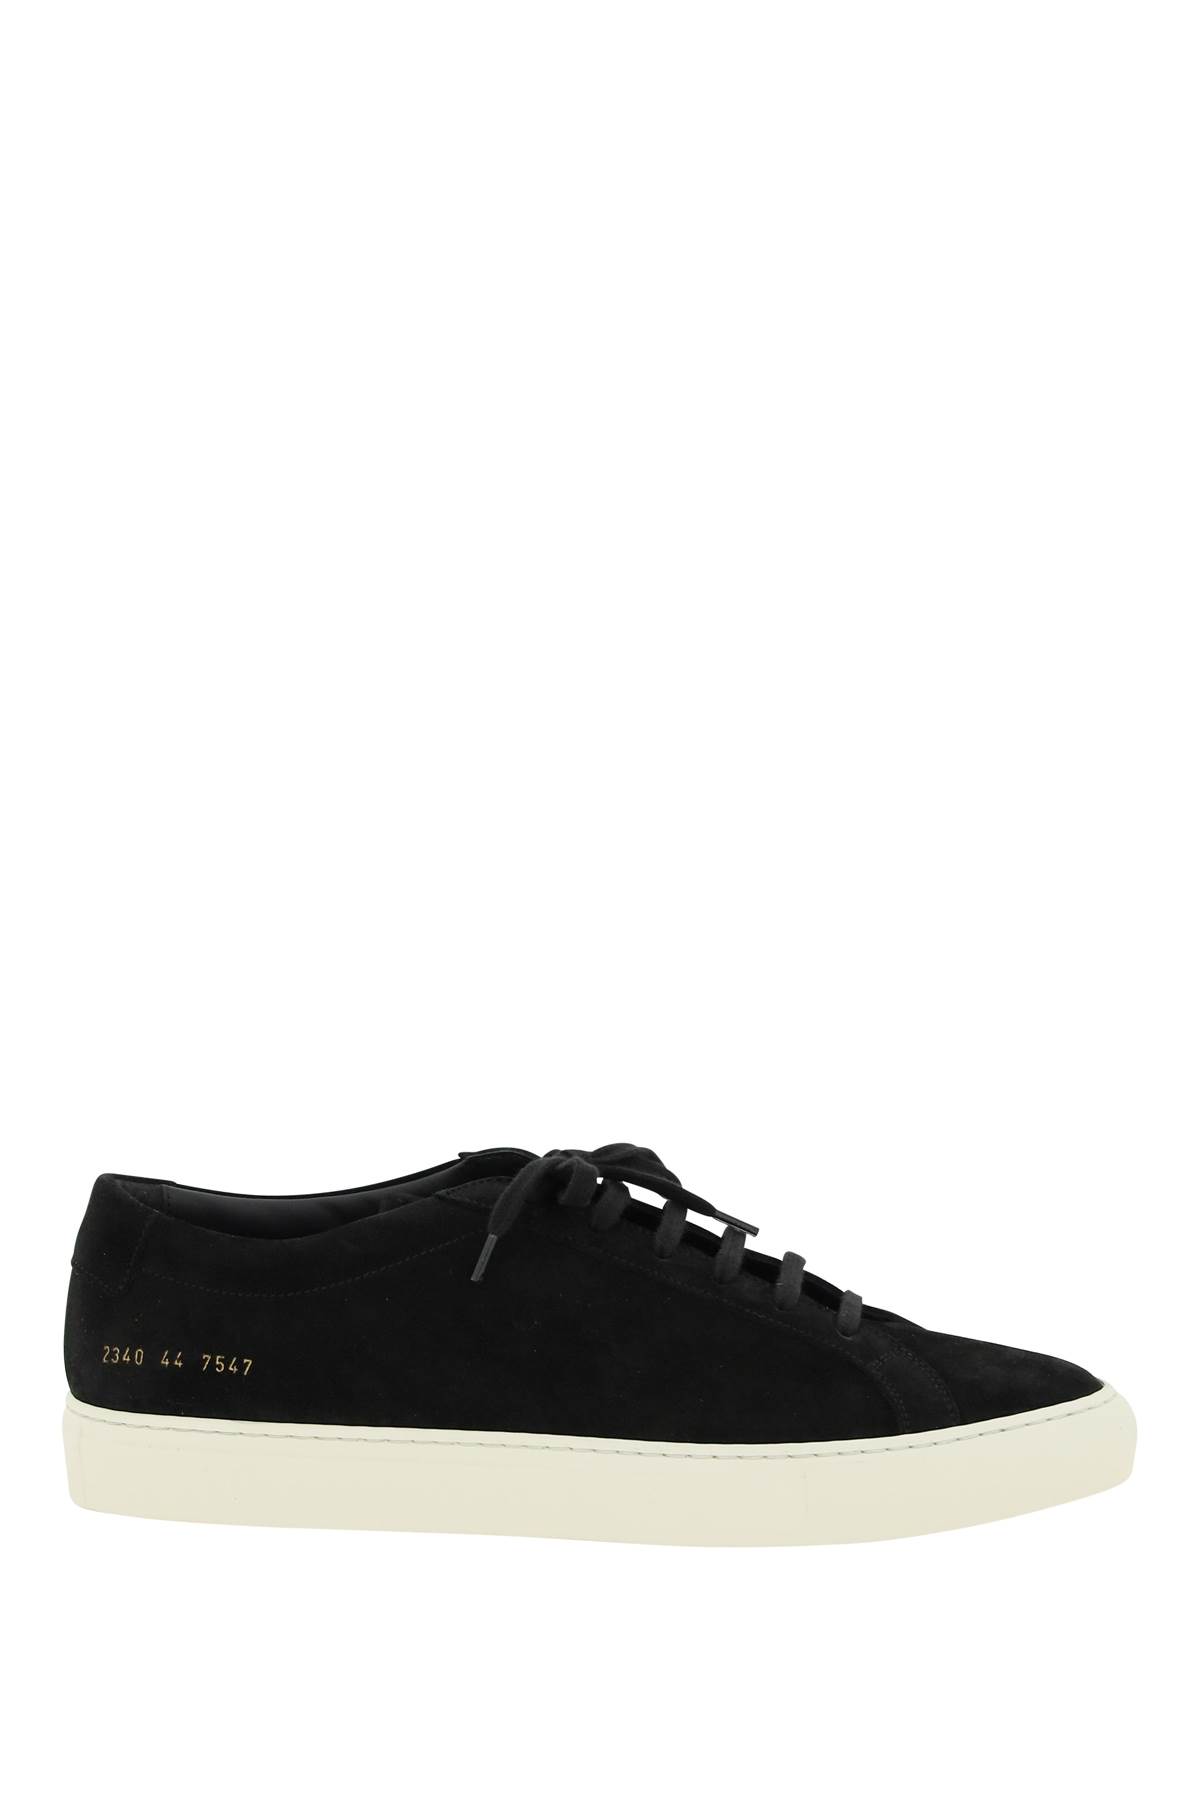 Common Projects Suede Leather Achilles Low Sneakers